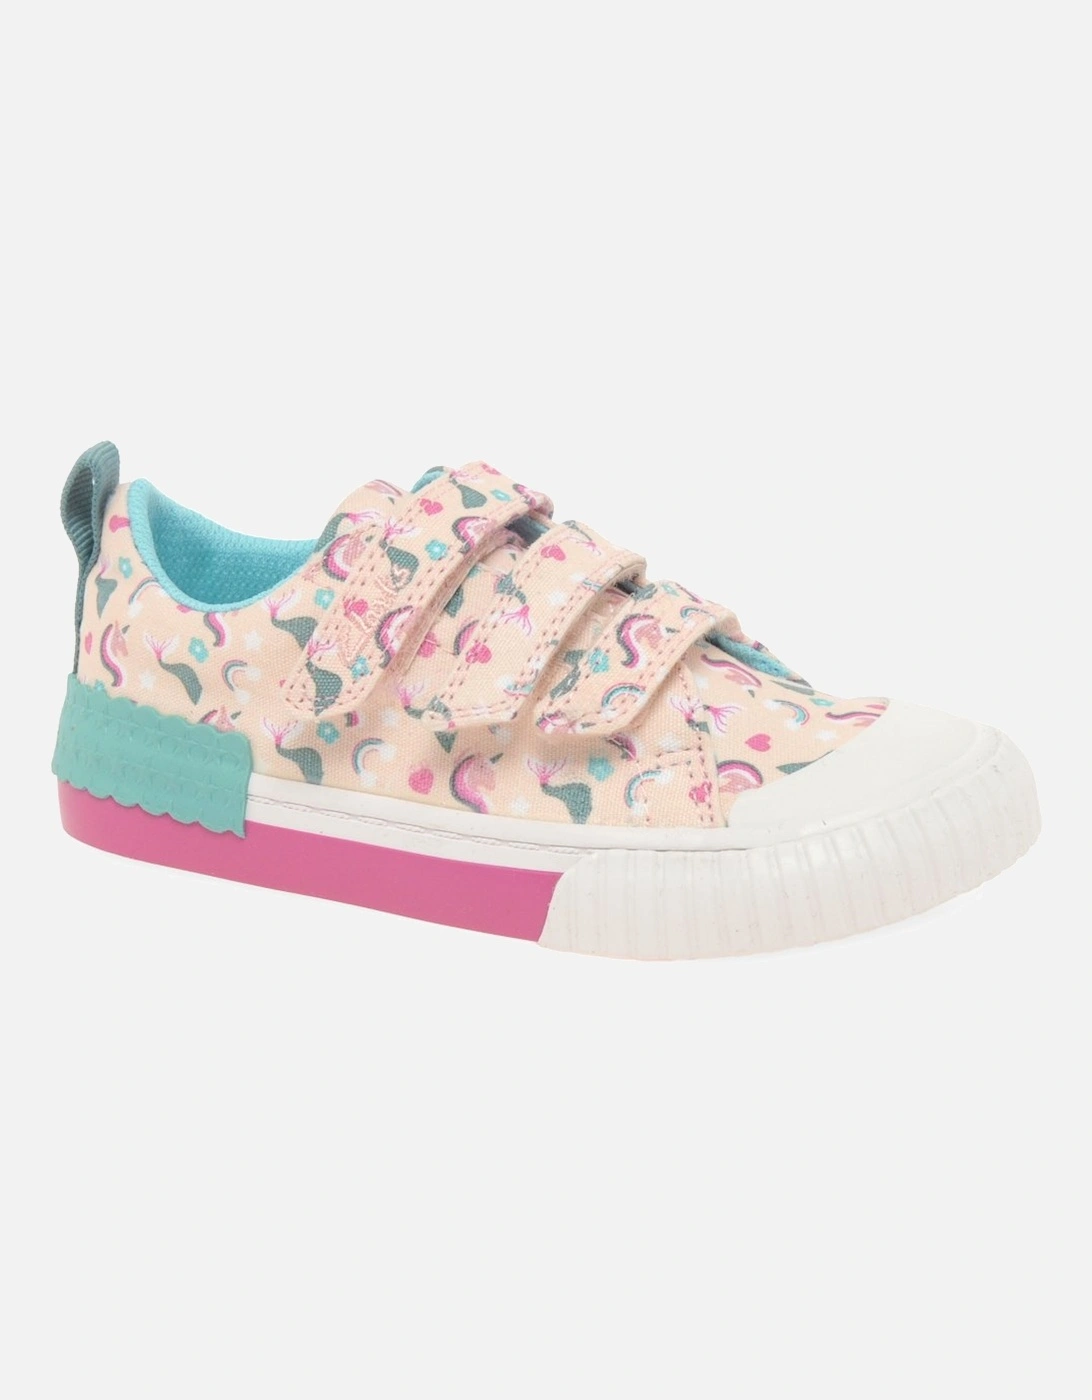 Foxing Myth K Girls Canvas Shoes, 7 of 6